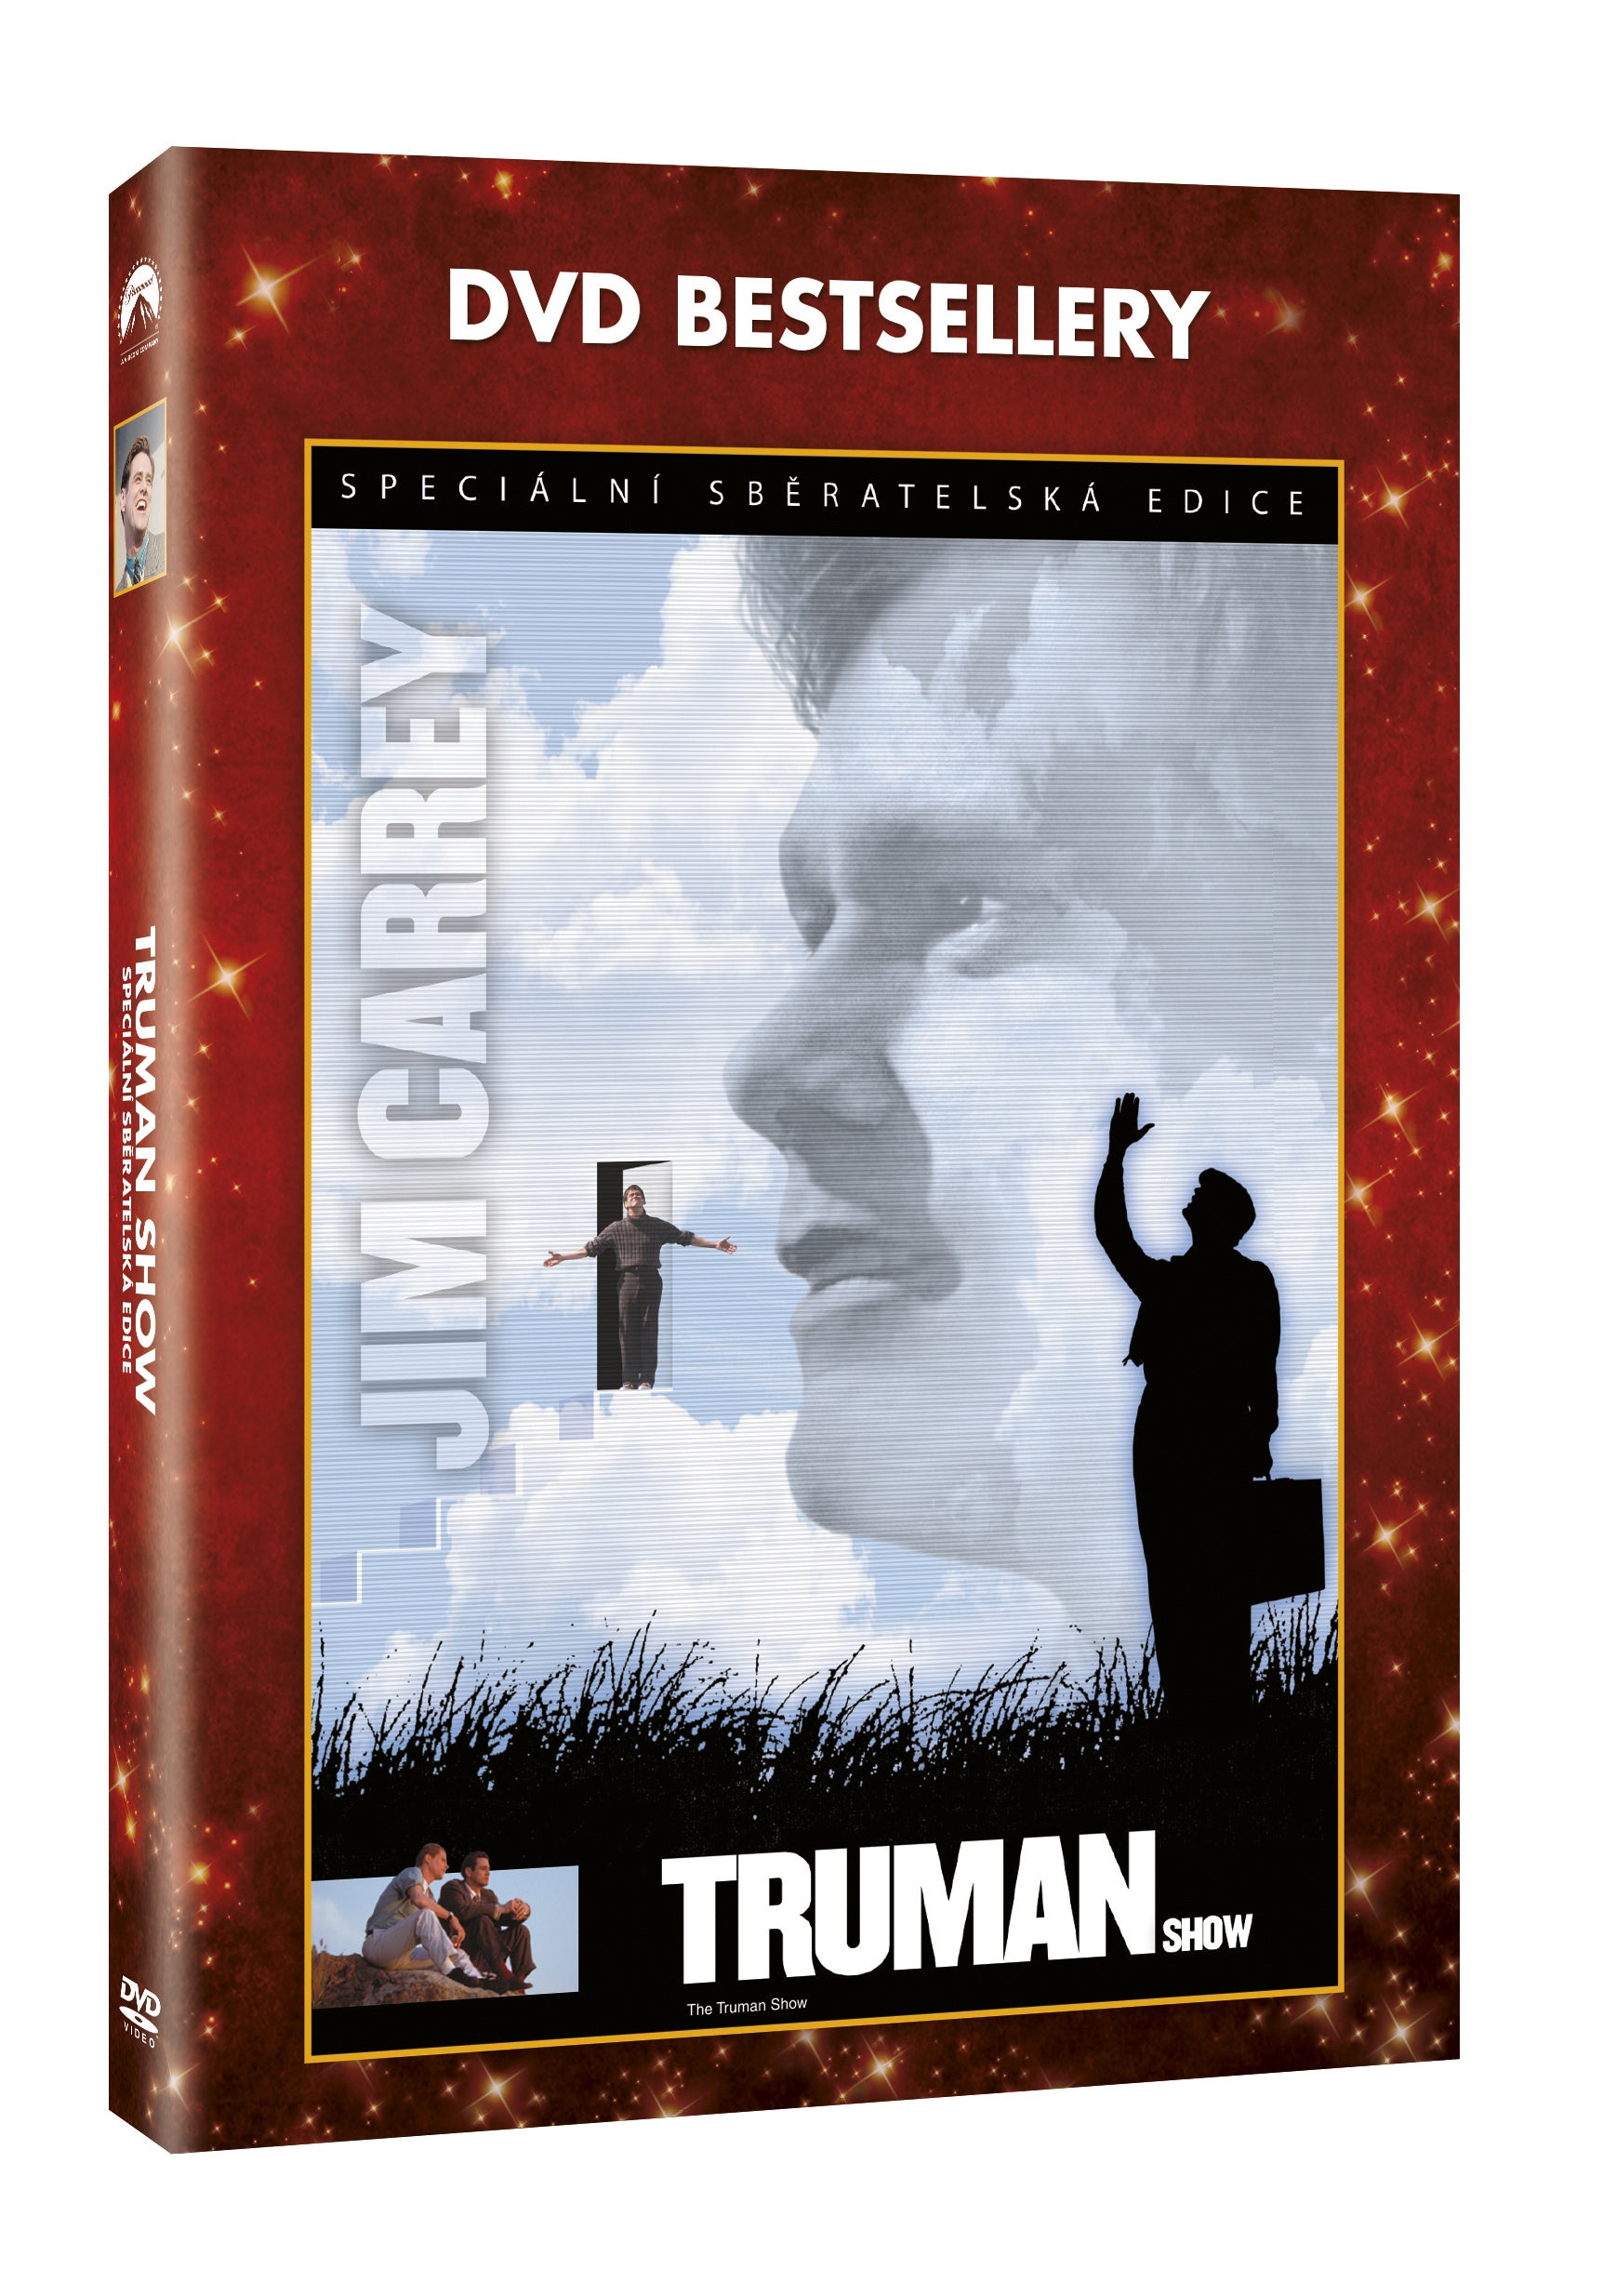 Truman show SCE DVD - Edice DVD bestsellery / Truman Show, The (Special Edition)